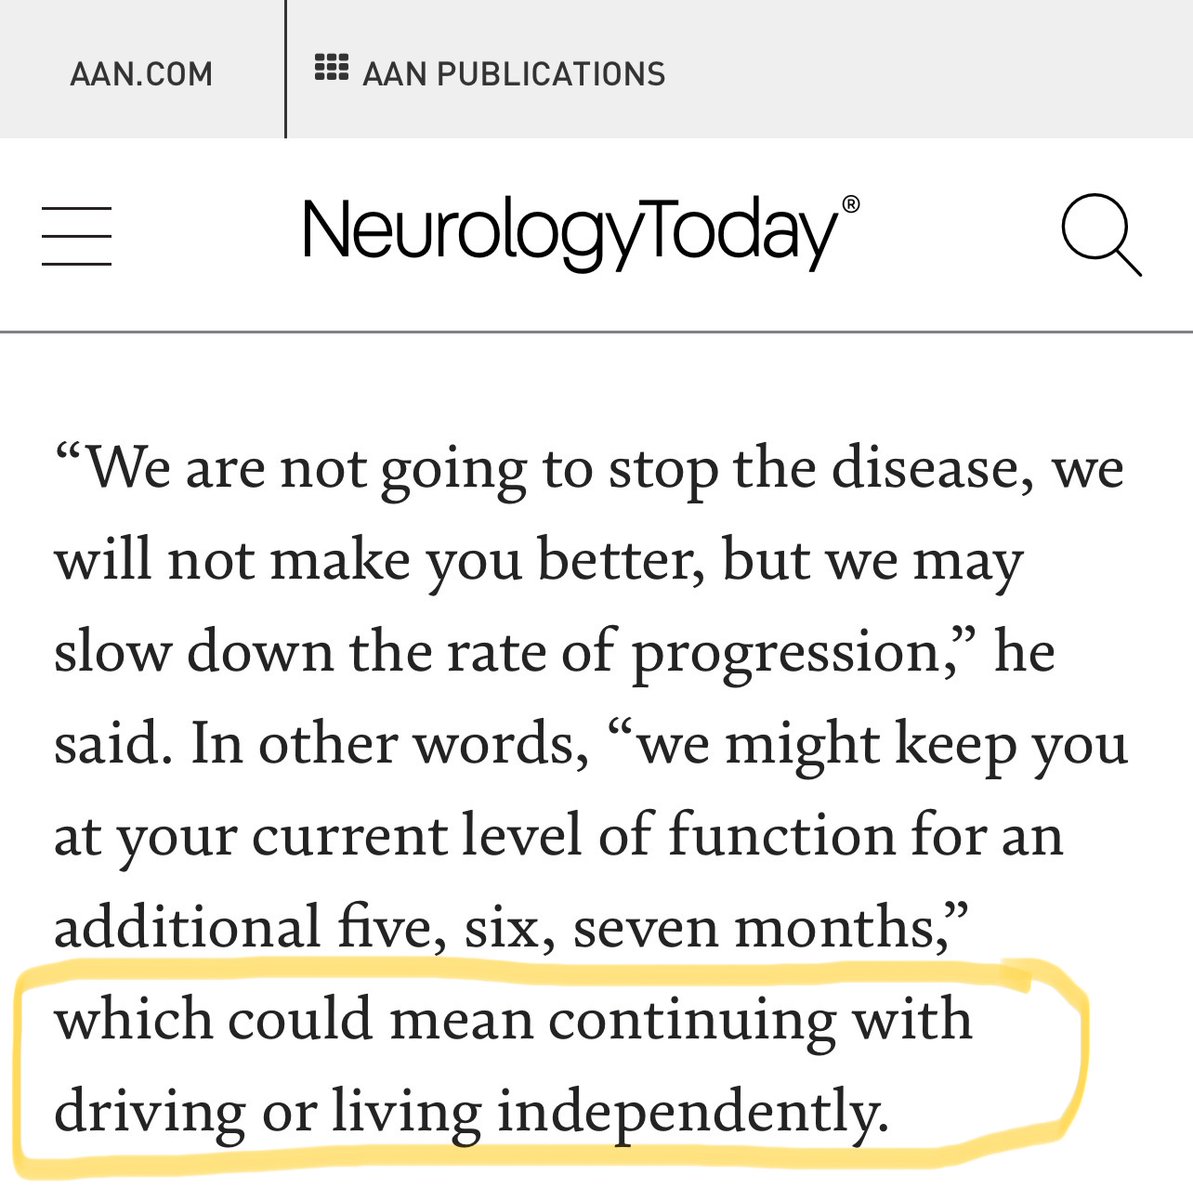 Misleading to claim #donanemab or any amyloid lowering Rx will allow an #Alzheimer’s patient to continue to drive independently. Inserting the claim immediately outside a respected KOL’s quote also risks wrongly attributing this to them. Not a good look @ProfRobHoward @pash22